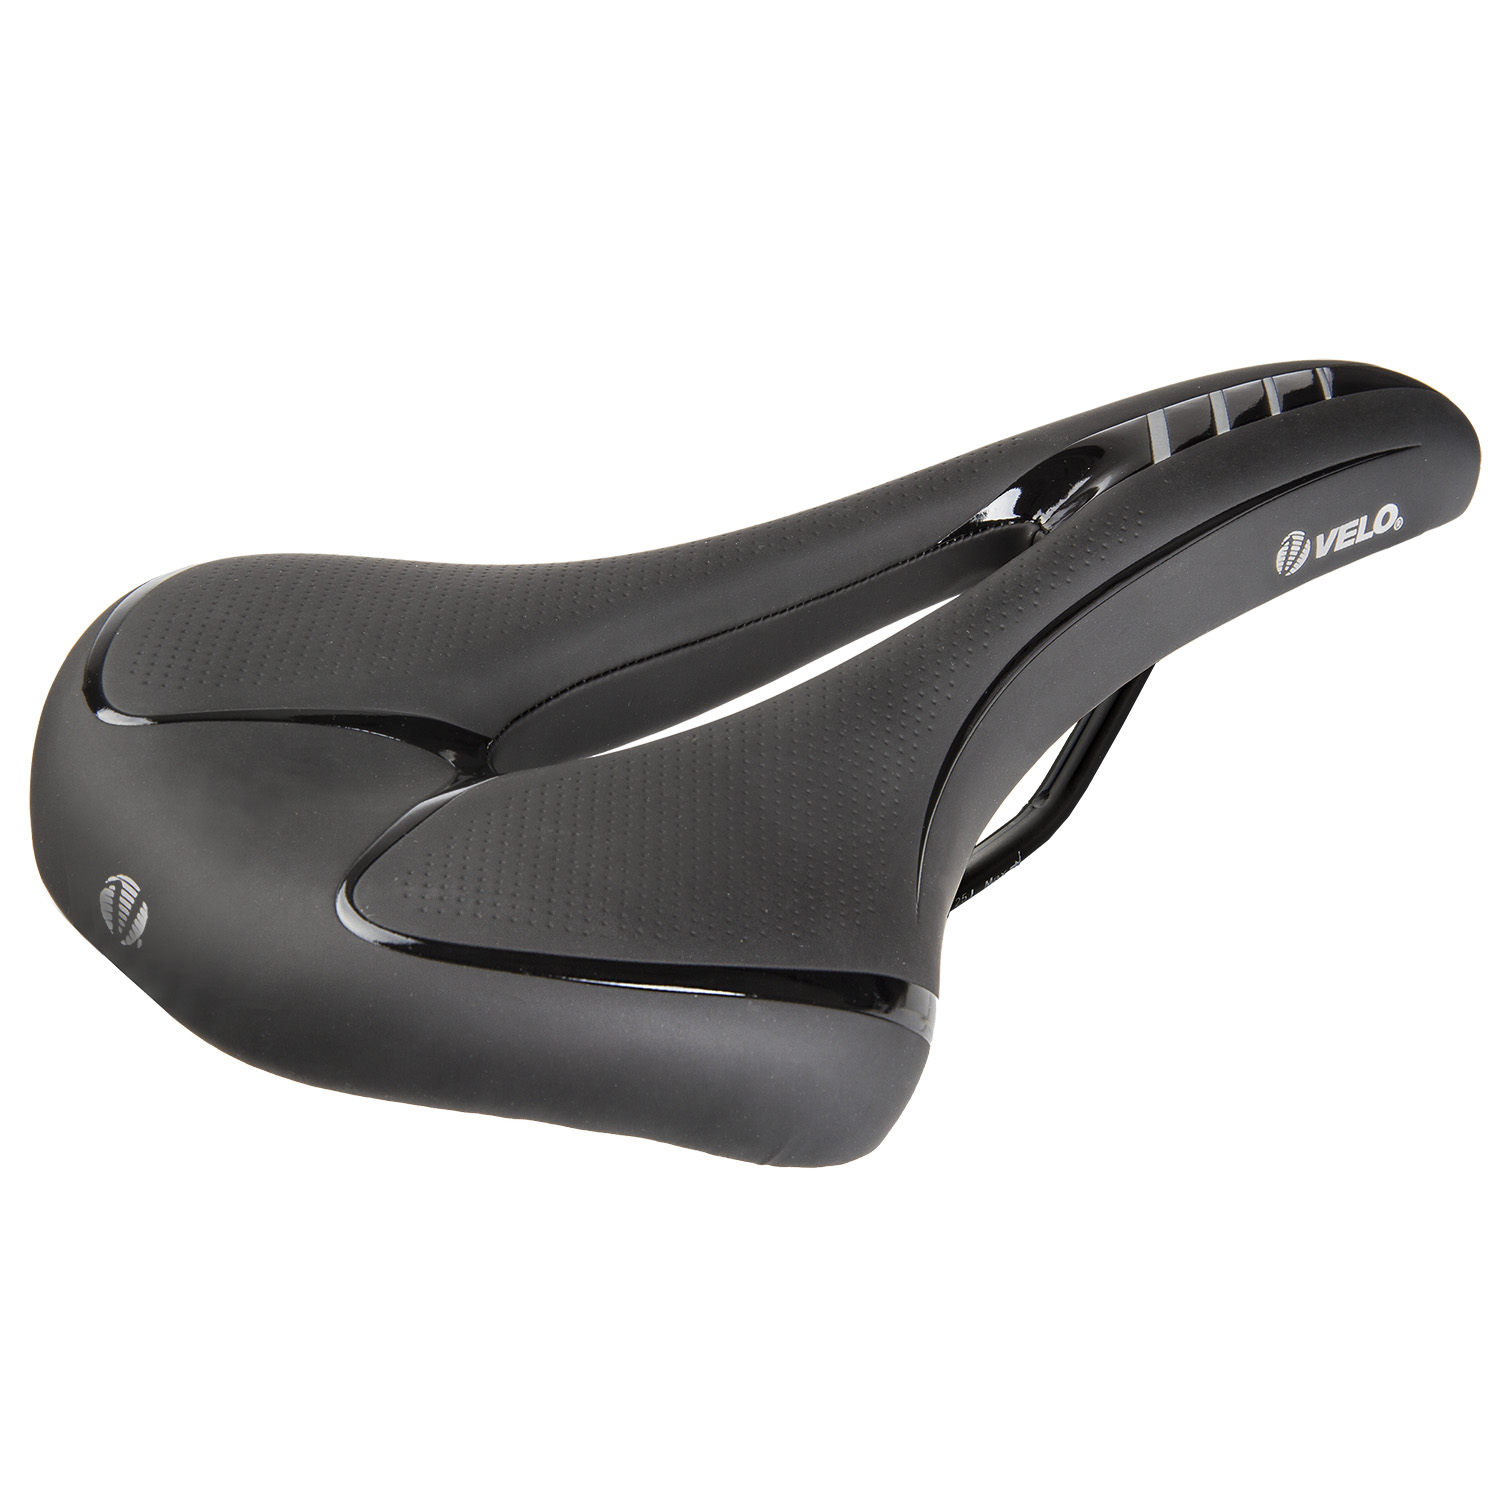 250526 VELO Velo-Fit Athlete FC racing saddle – AVAILABLE IN SELECTED BIKE SHOP